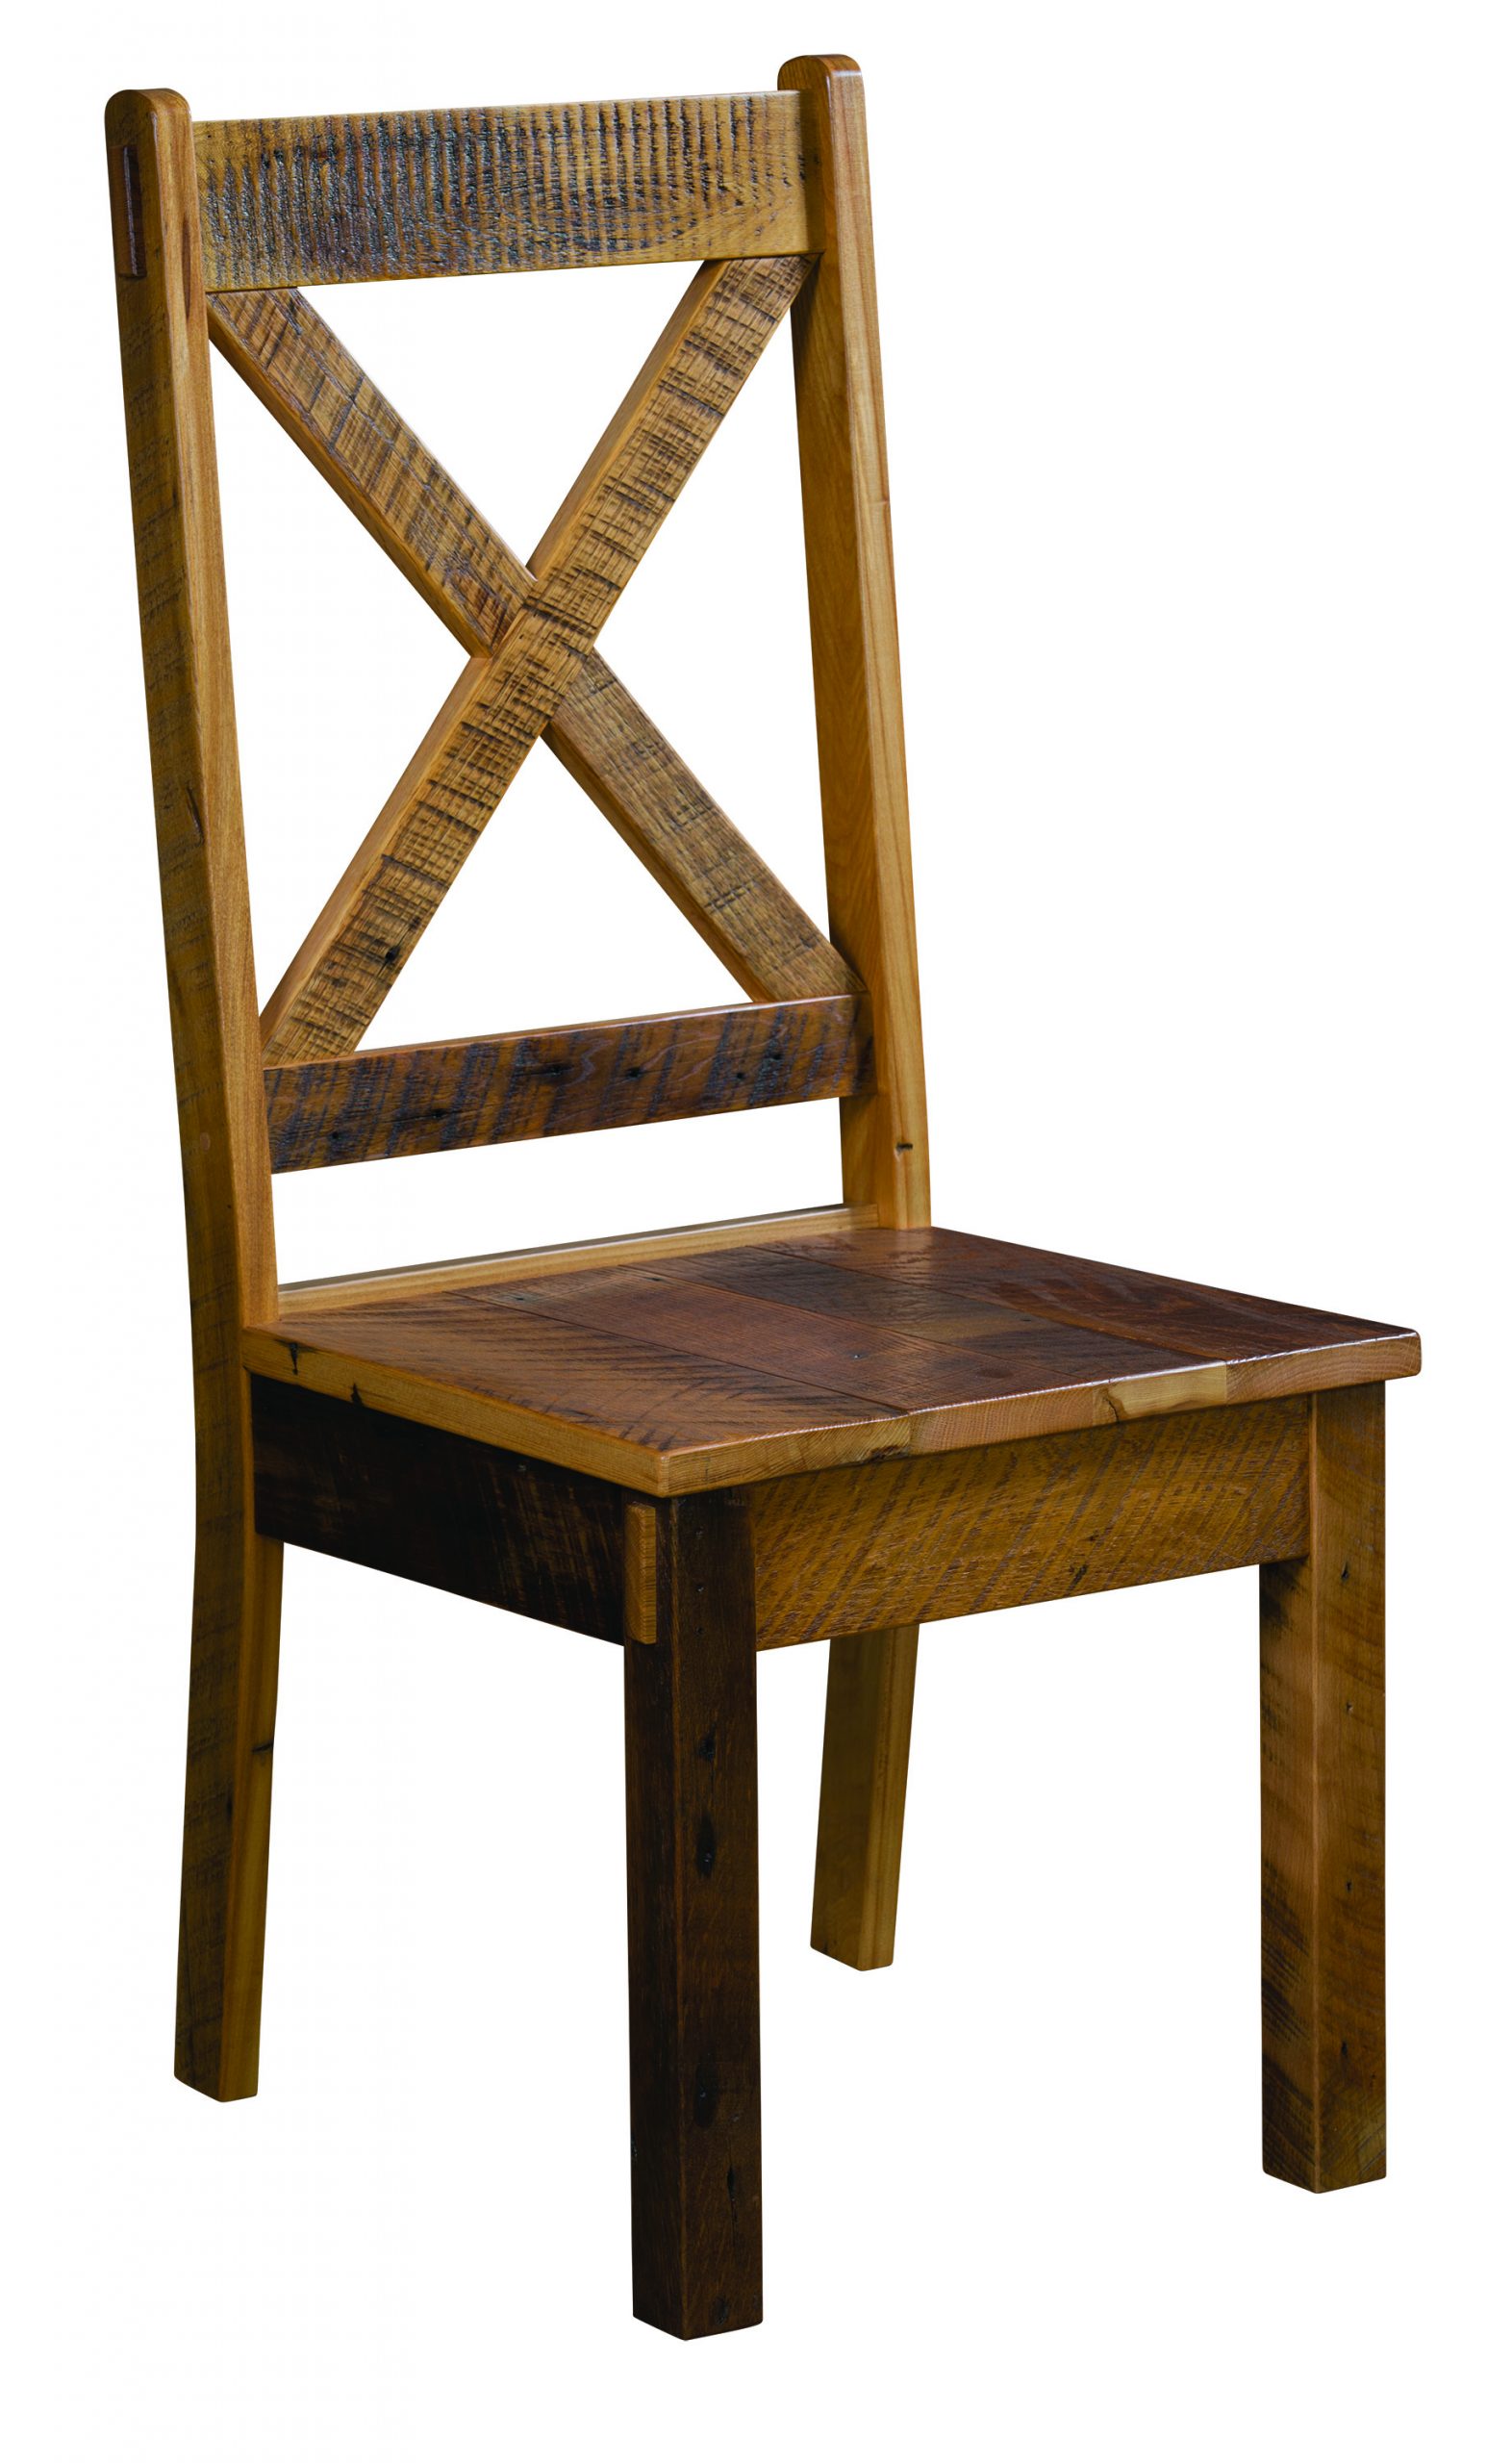 Solid wood furniture made by Cross Timbers Woodwork